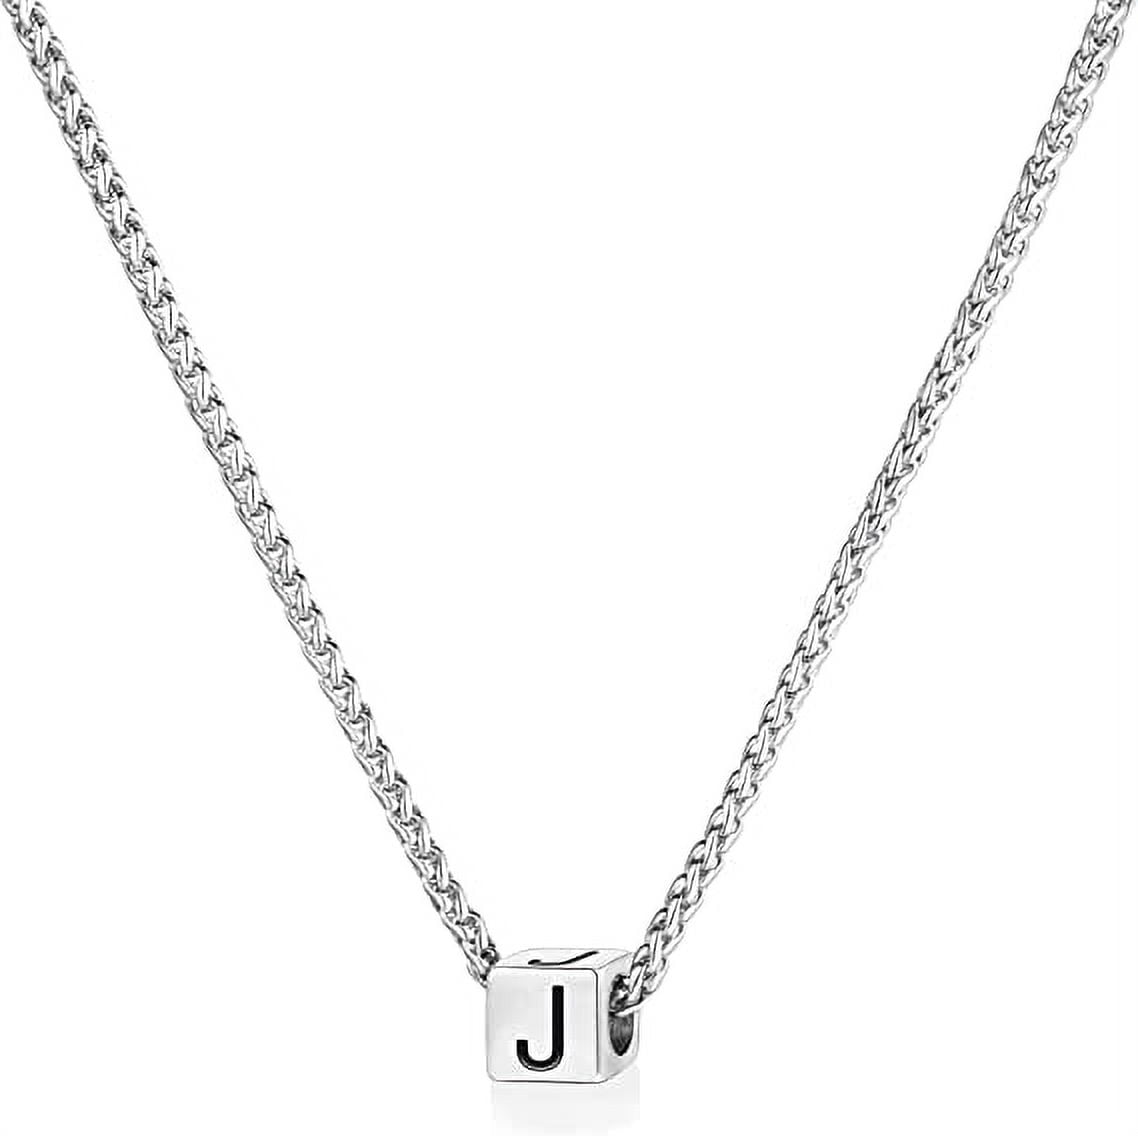 EFYTAL Silver Anchor Pendant with Ball Chain for Him • Graduation Gift -  EFYTAL Jewelry